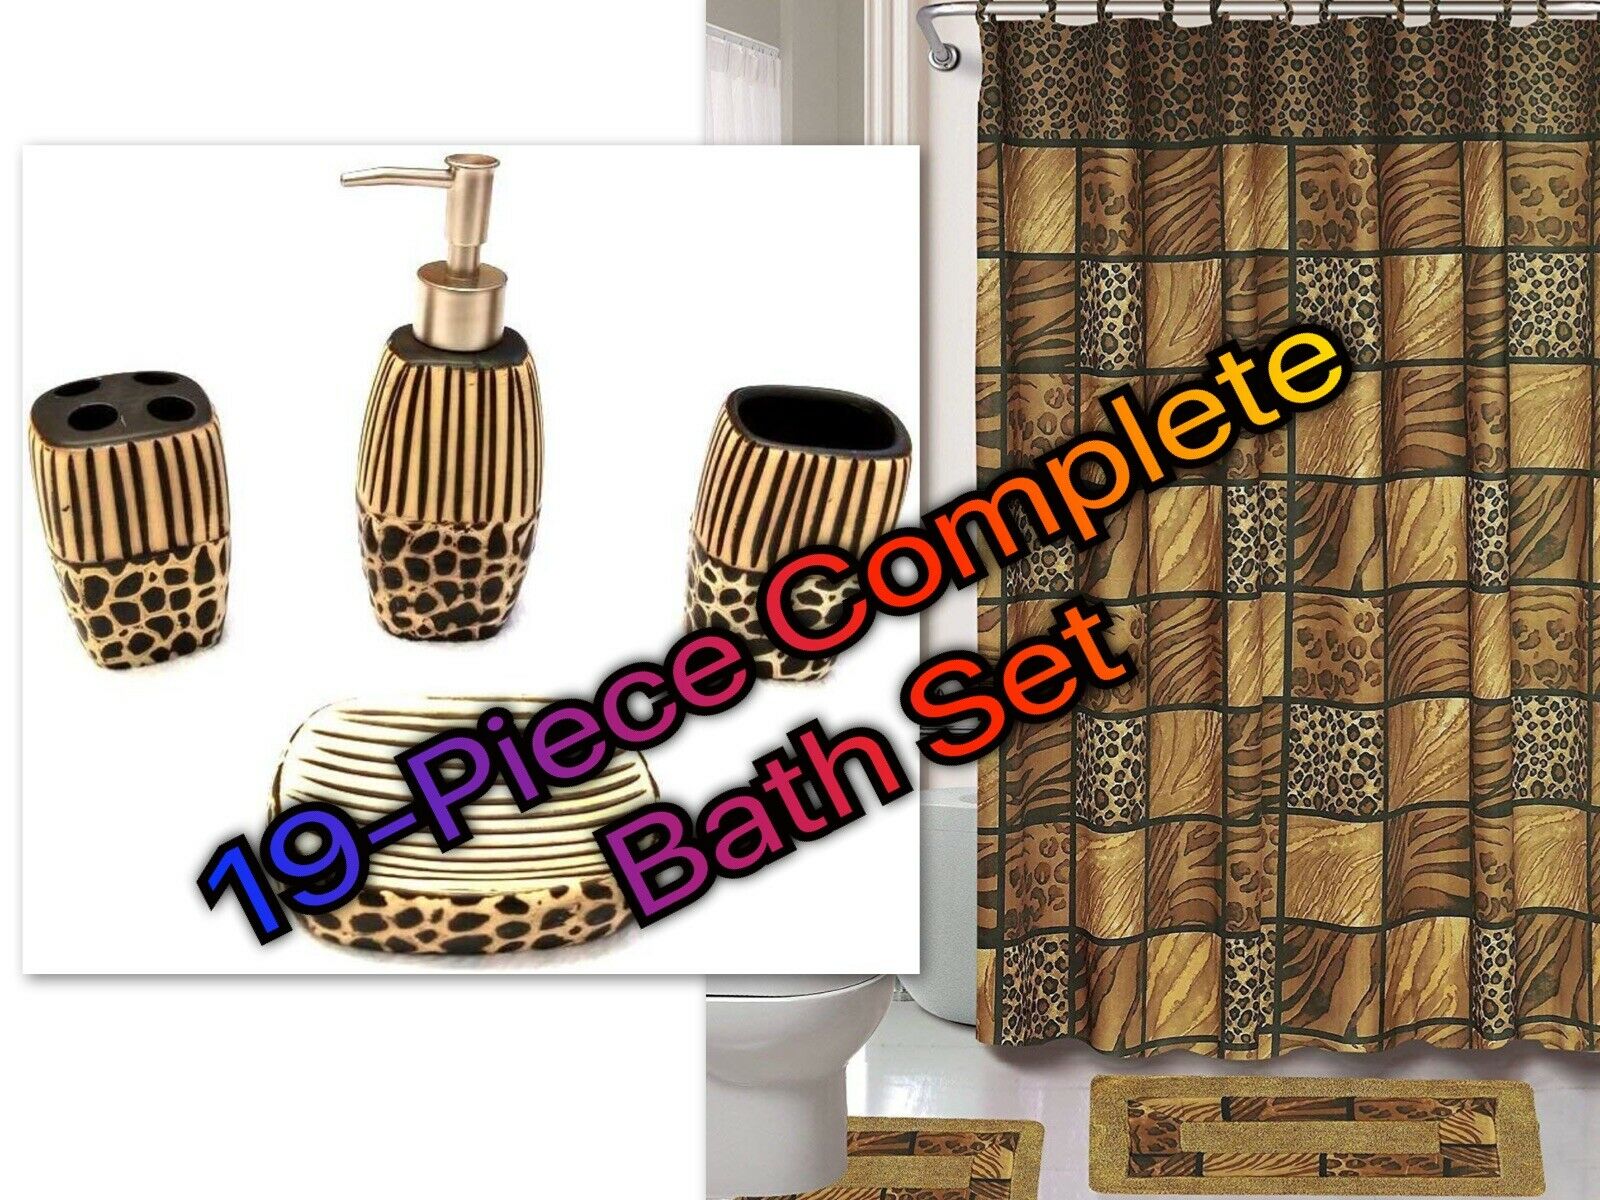 19-Piece Complete Bathroom Set Rugs Shower Curtain Hooks Ceramic All Included!!! - image 1 of 1